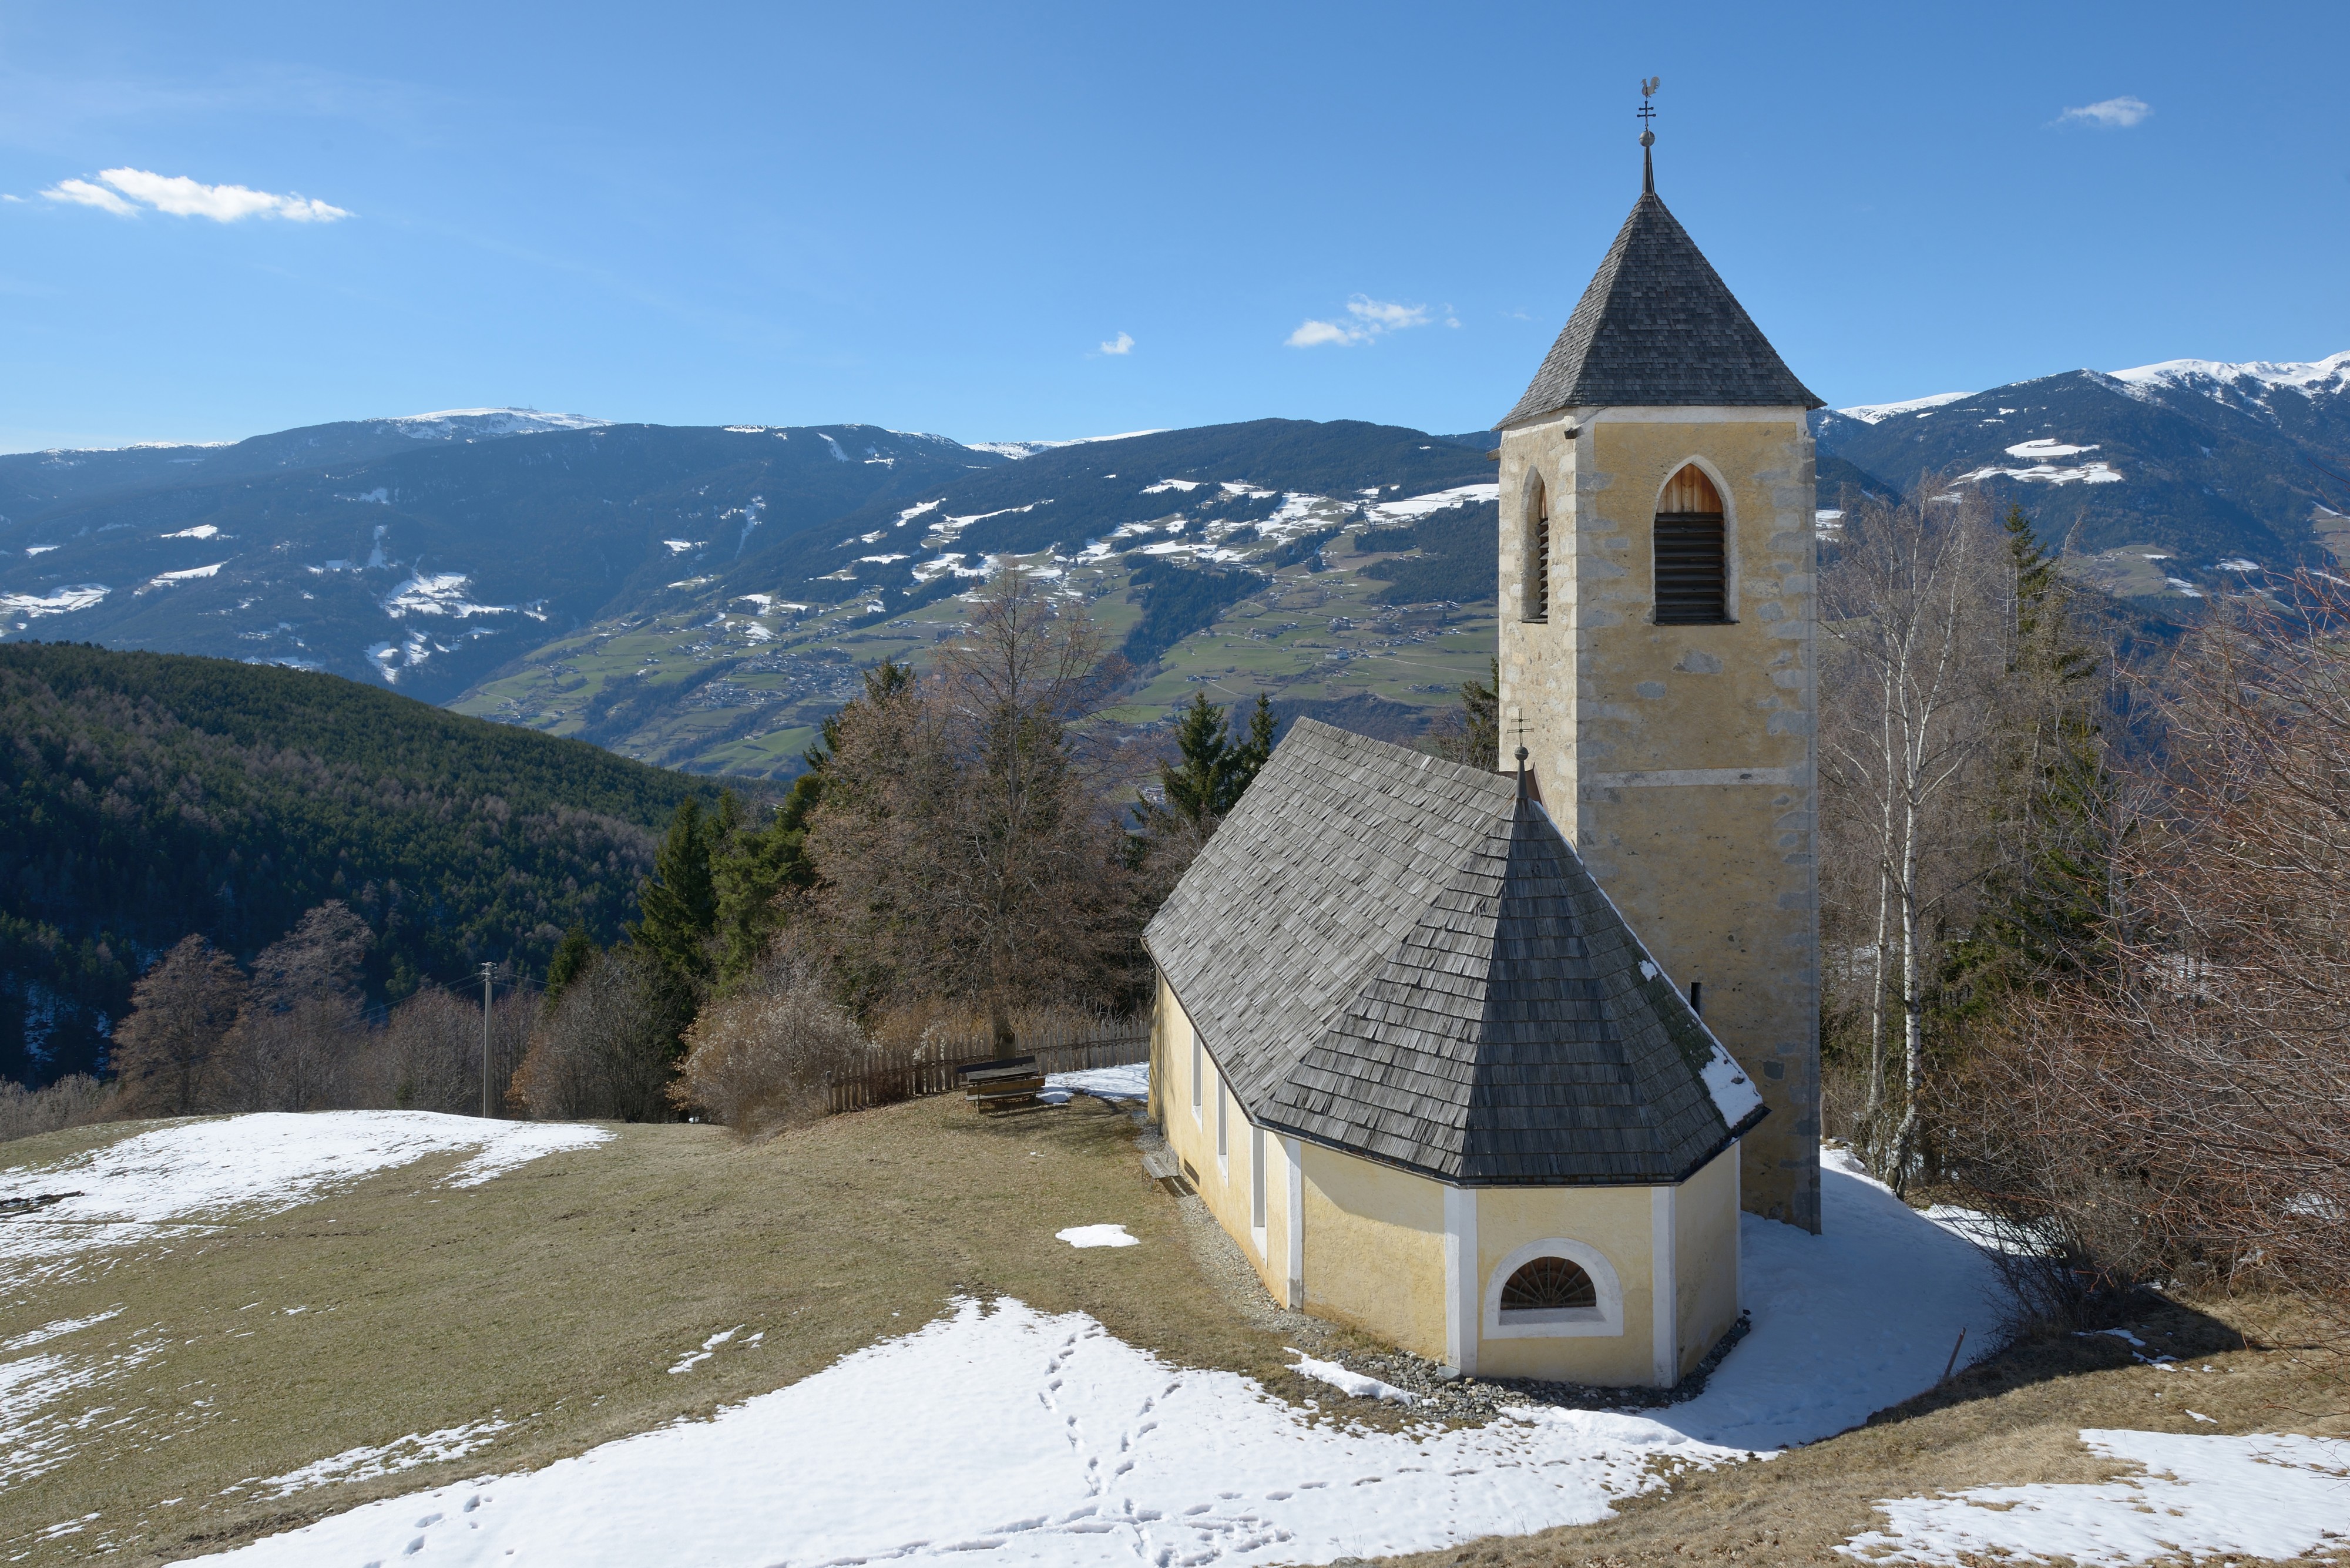 Saint John the Baptist church in Freins from above